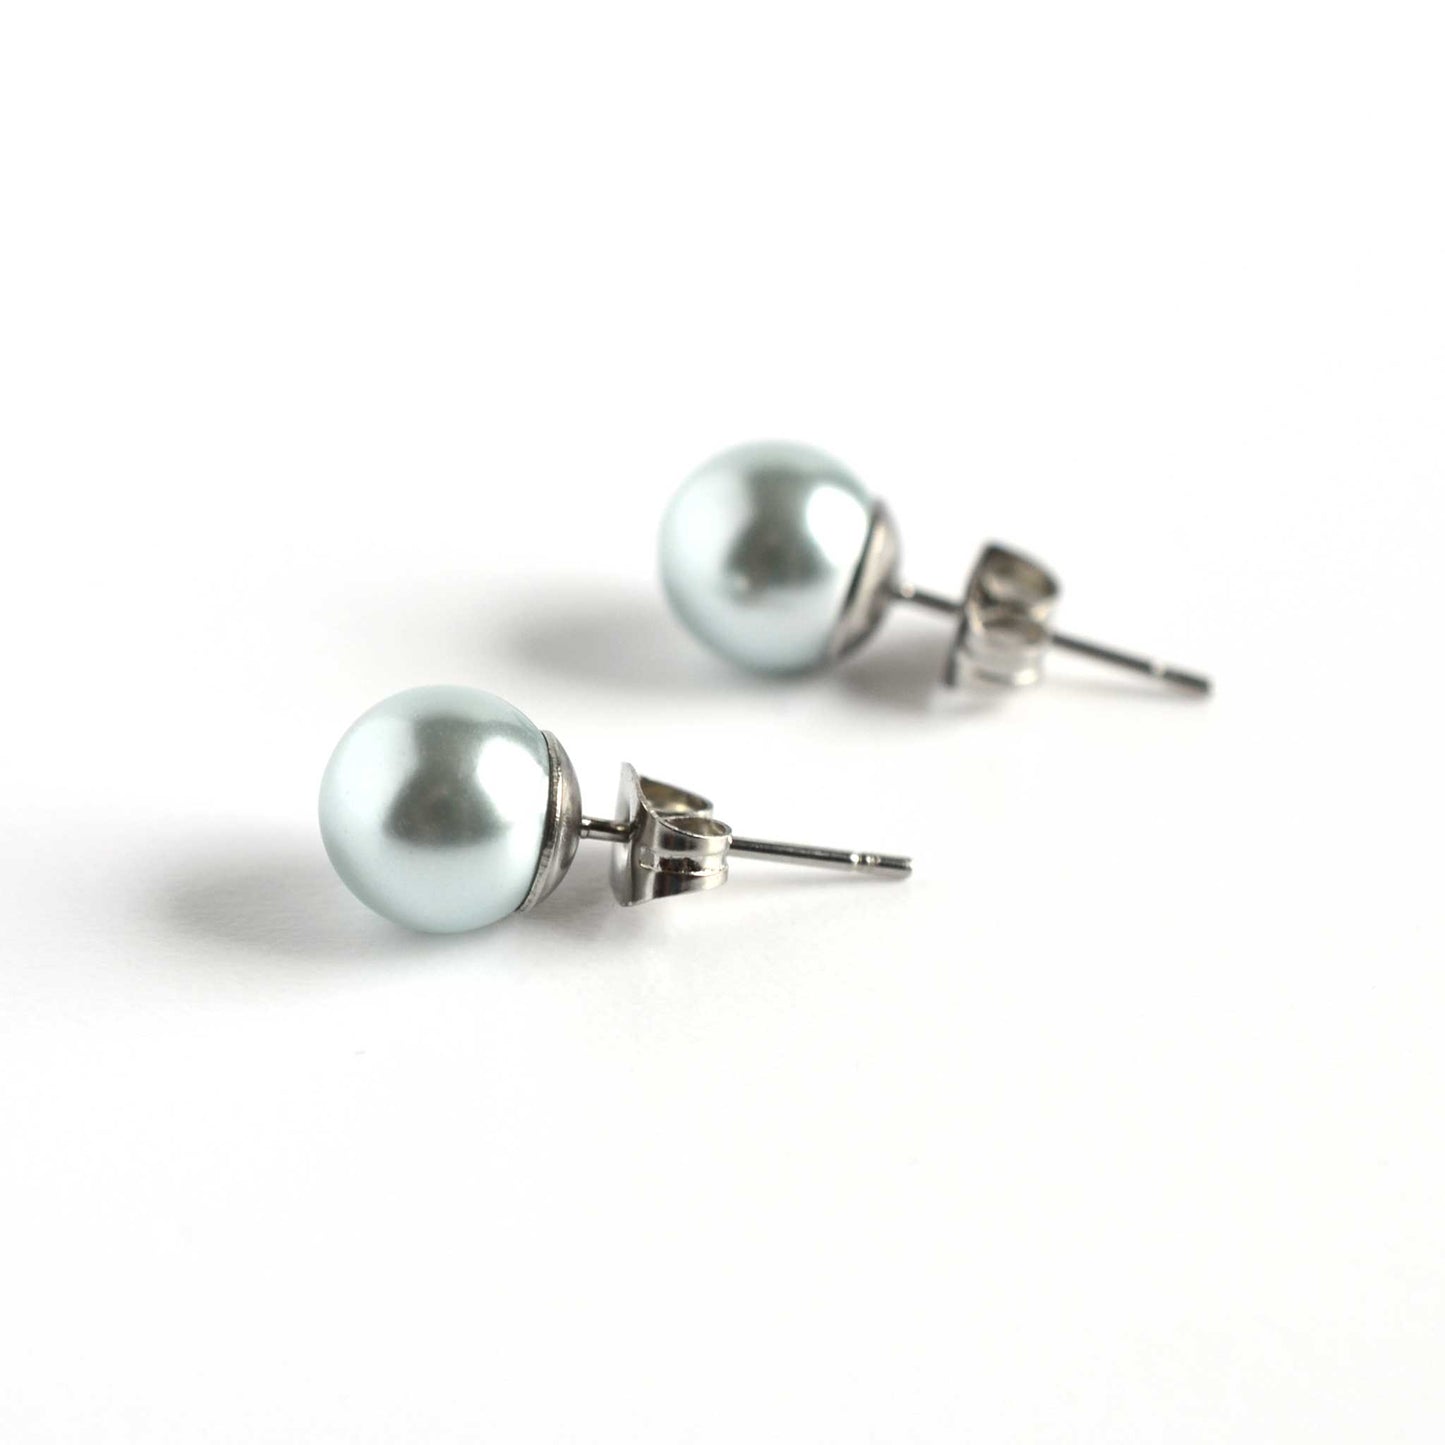 Side view of 8mm light blue faux pearl stud earrings on white background